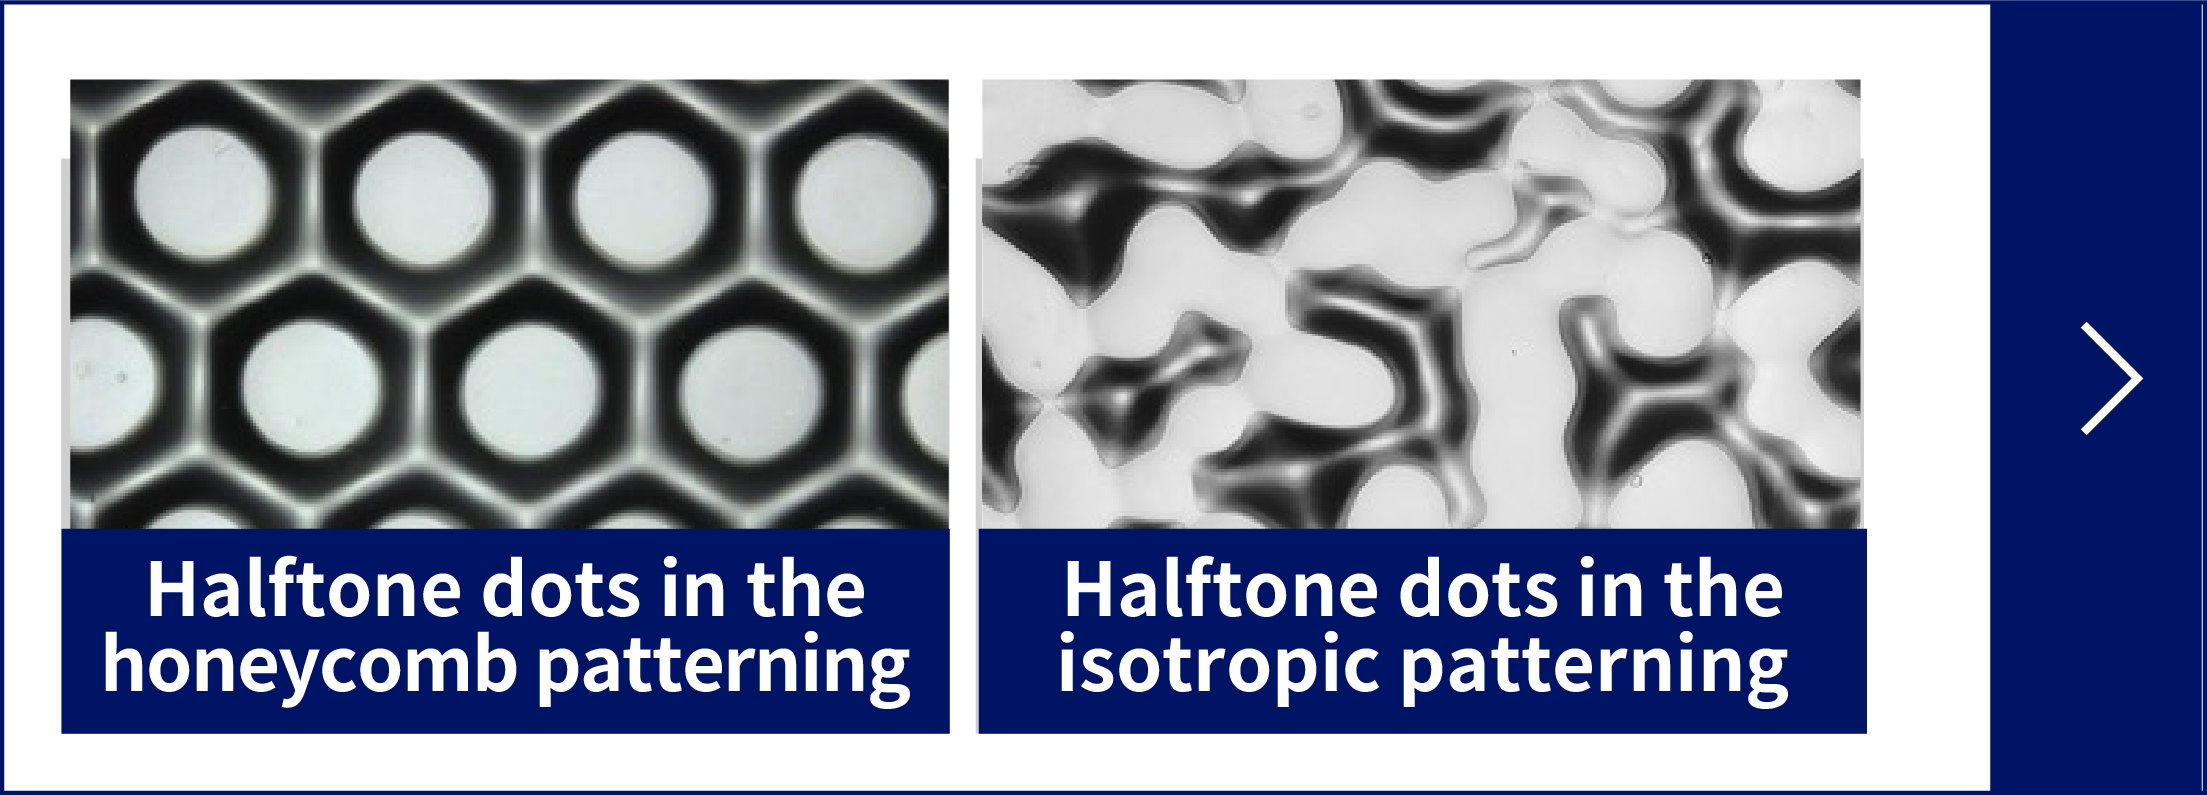 Halftone dots in the honeycomb patterning、Halftone dots in the isotropic patterning